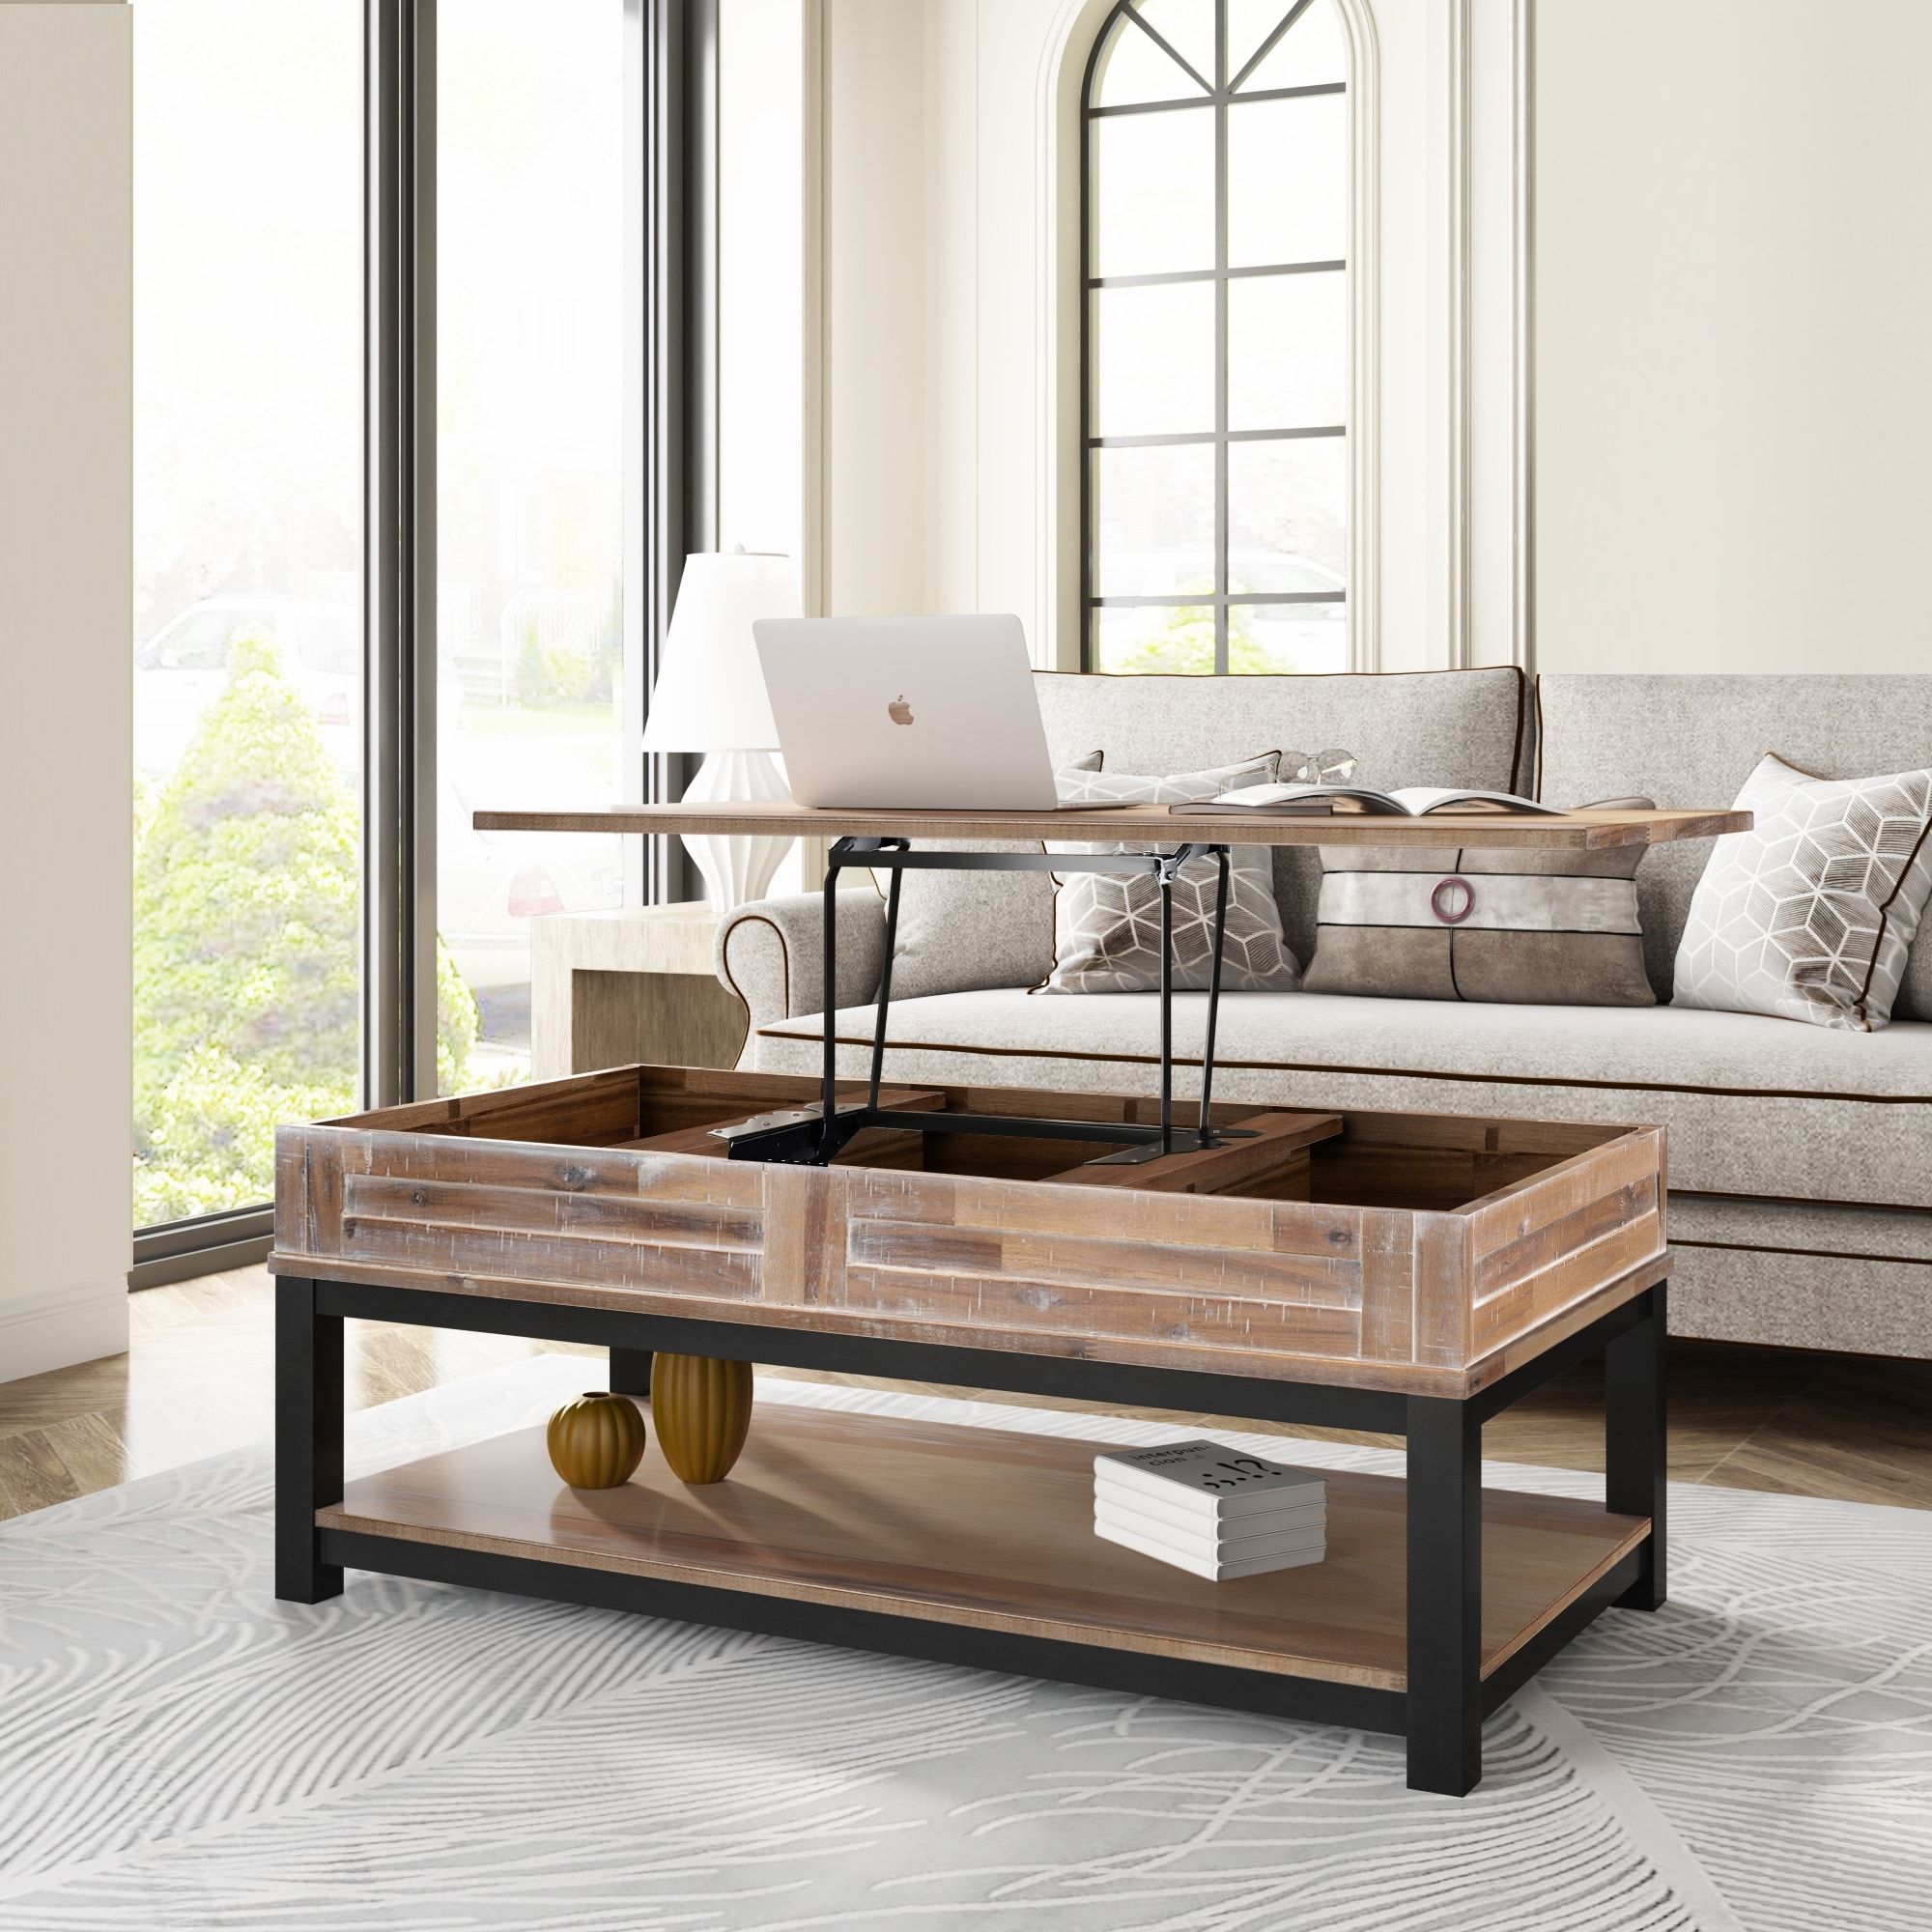 Wooden Lift Top Coffee Table With Inner Storage Space And Shelf – Bed Bath  & Beyond – 36909922 Throughout Lift Top Coffee Tables With Shelves (Photo 3 of 15)